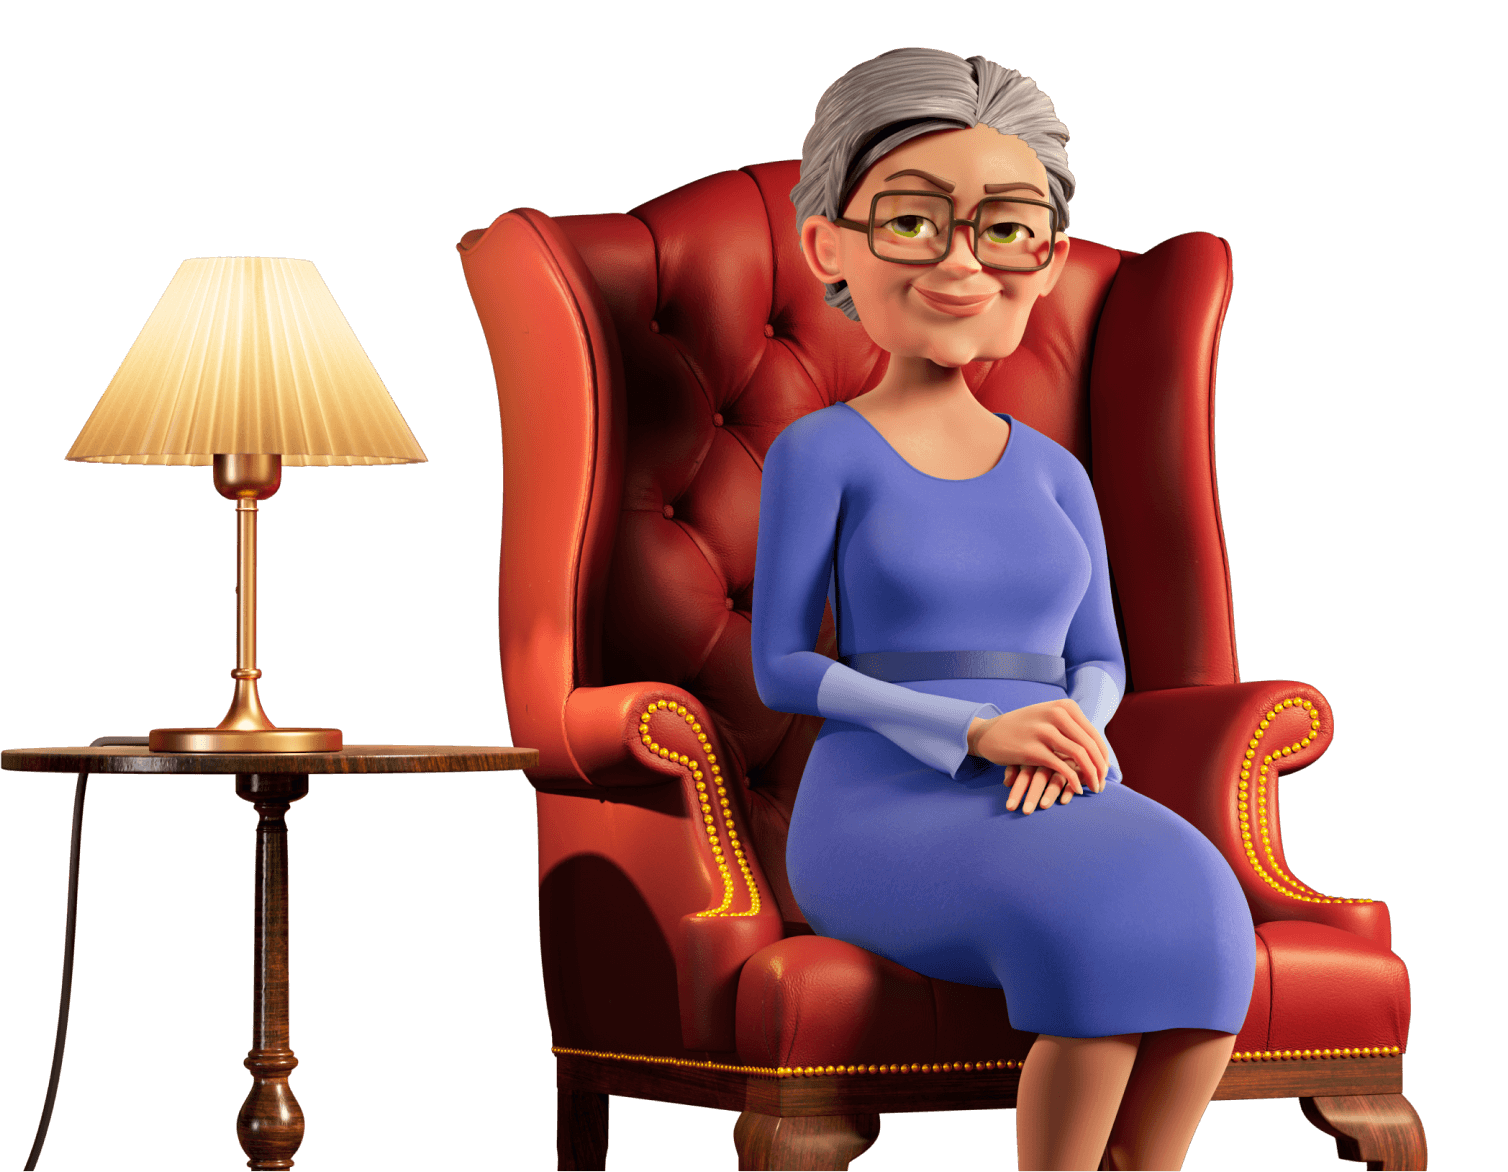 Ursula Boulton – Grandma from Merge Mansion, sitting in a chair 